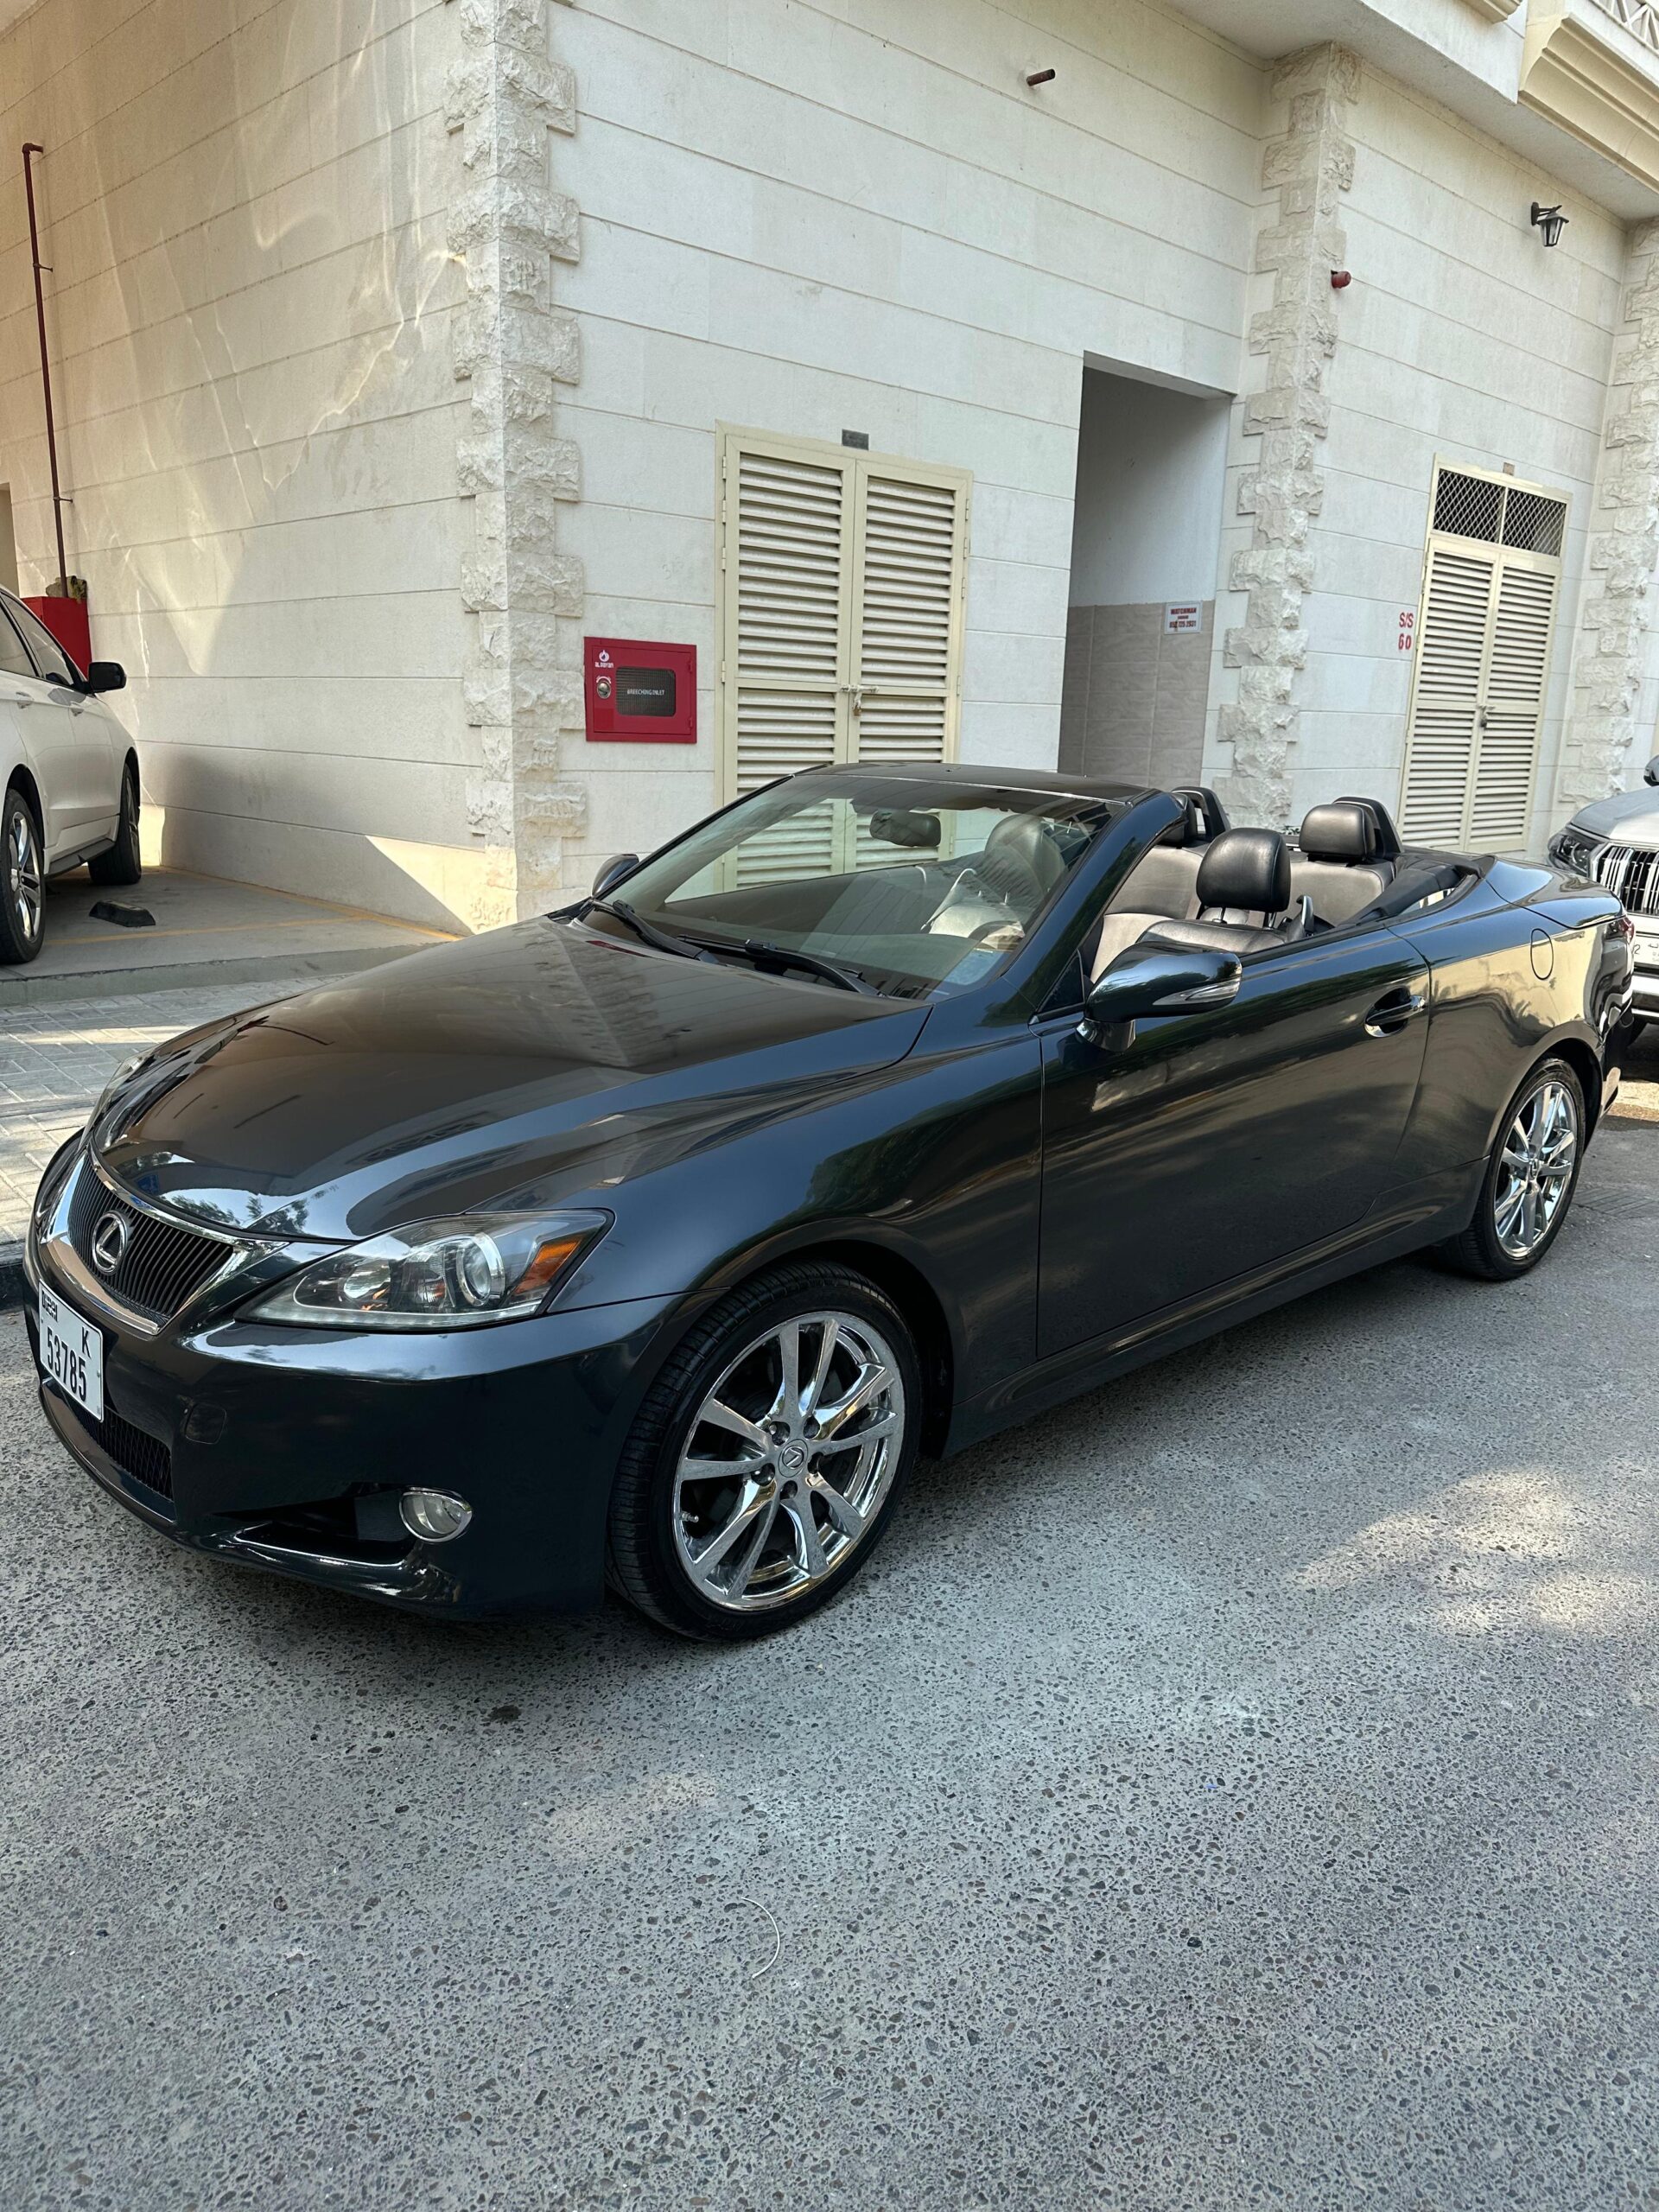 2010 Lexus IS 250 Convertible for Sale